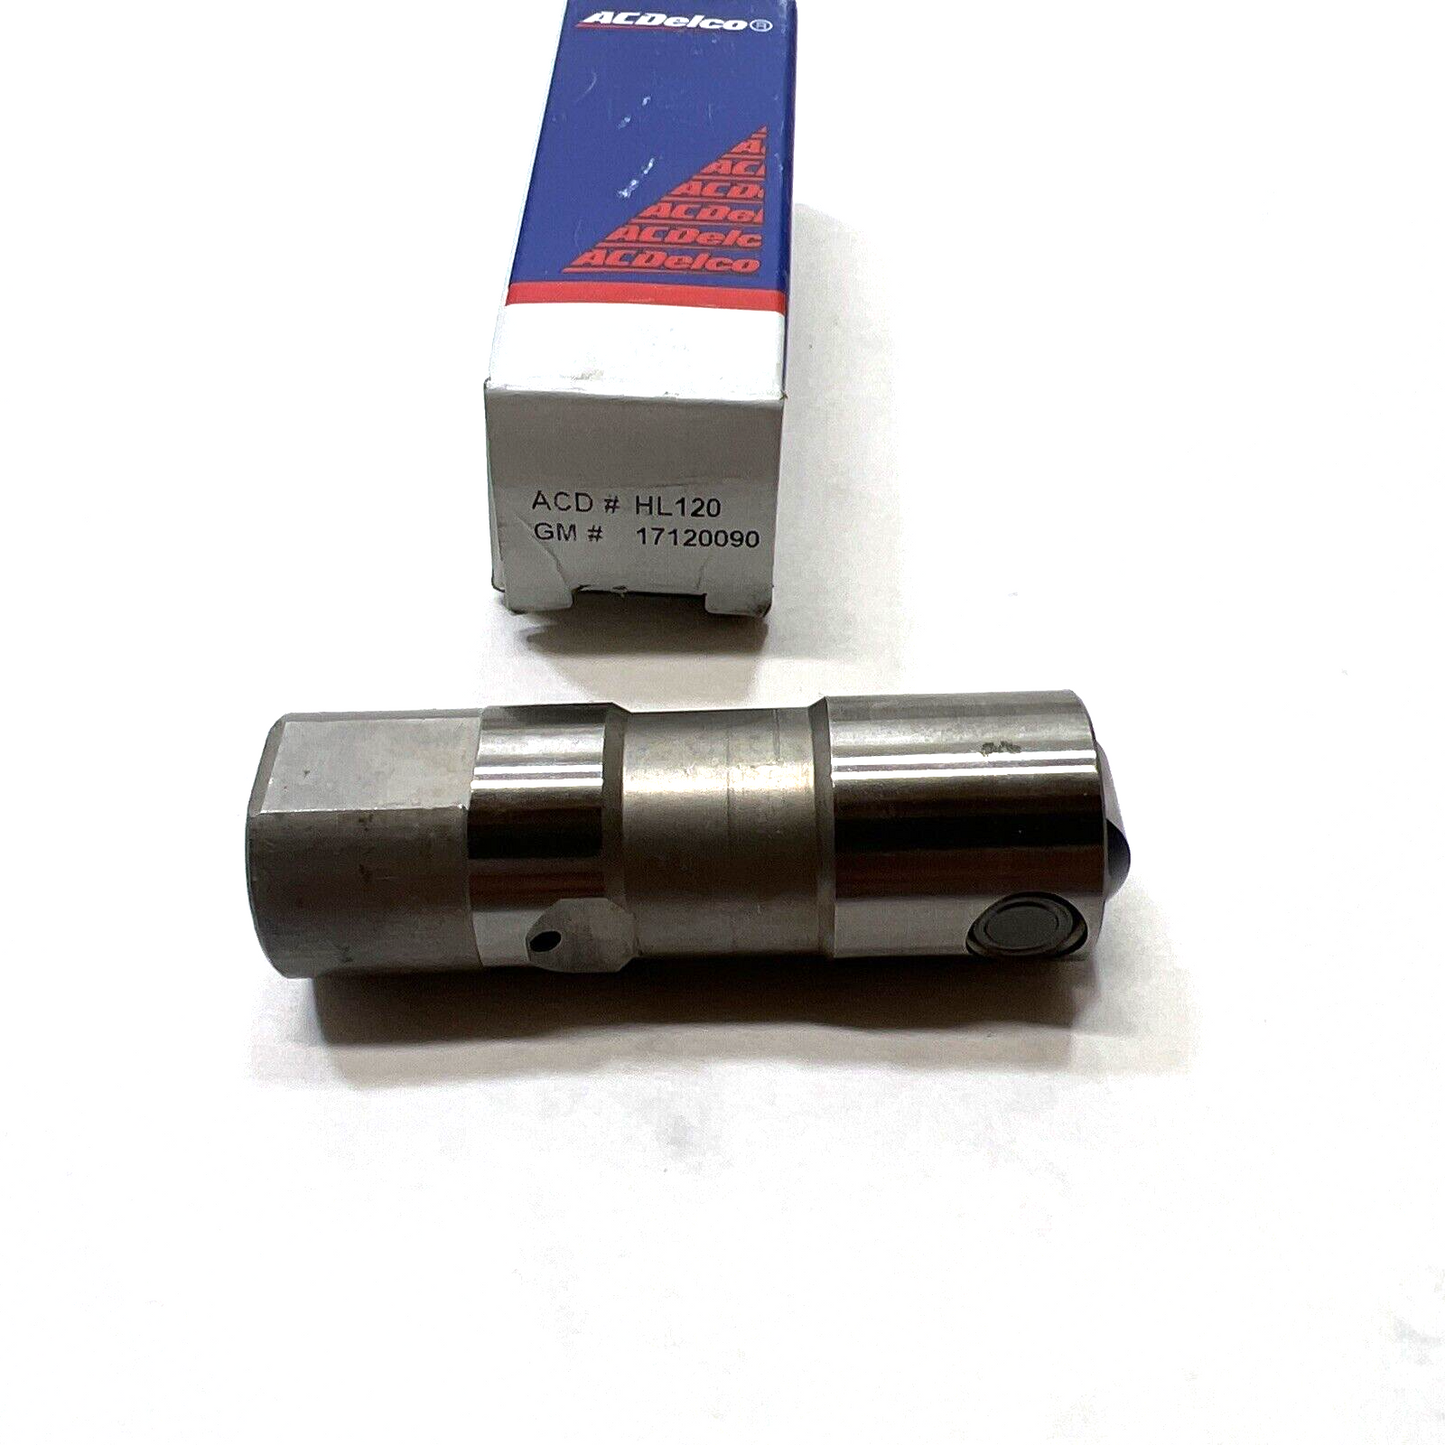 New OEM Genuine GM Engine Roller Lifter GM ACDelco 17120090